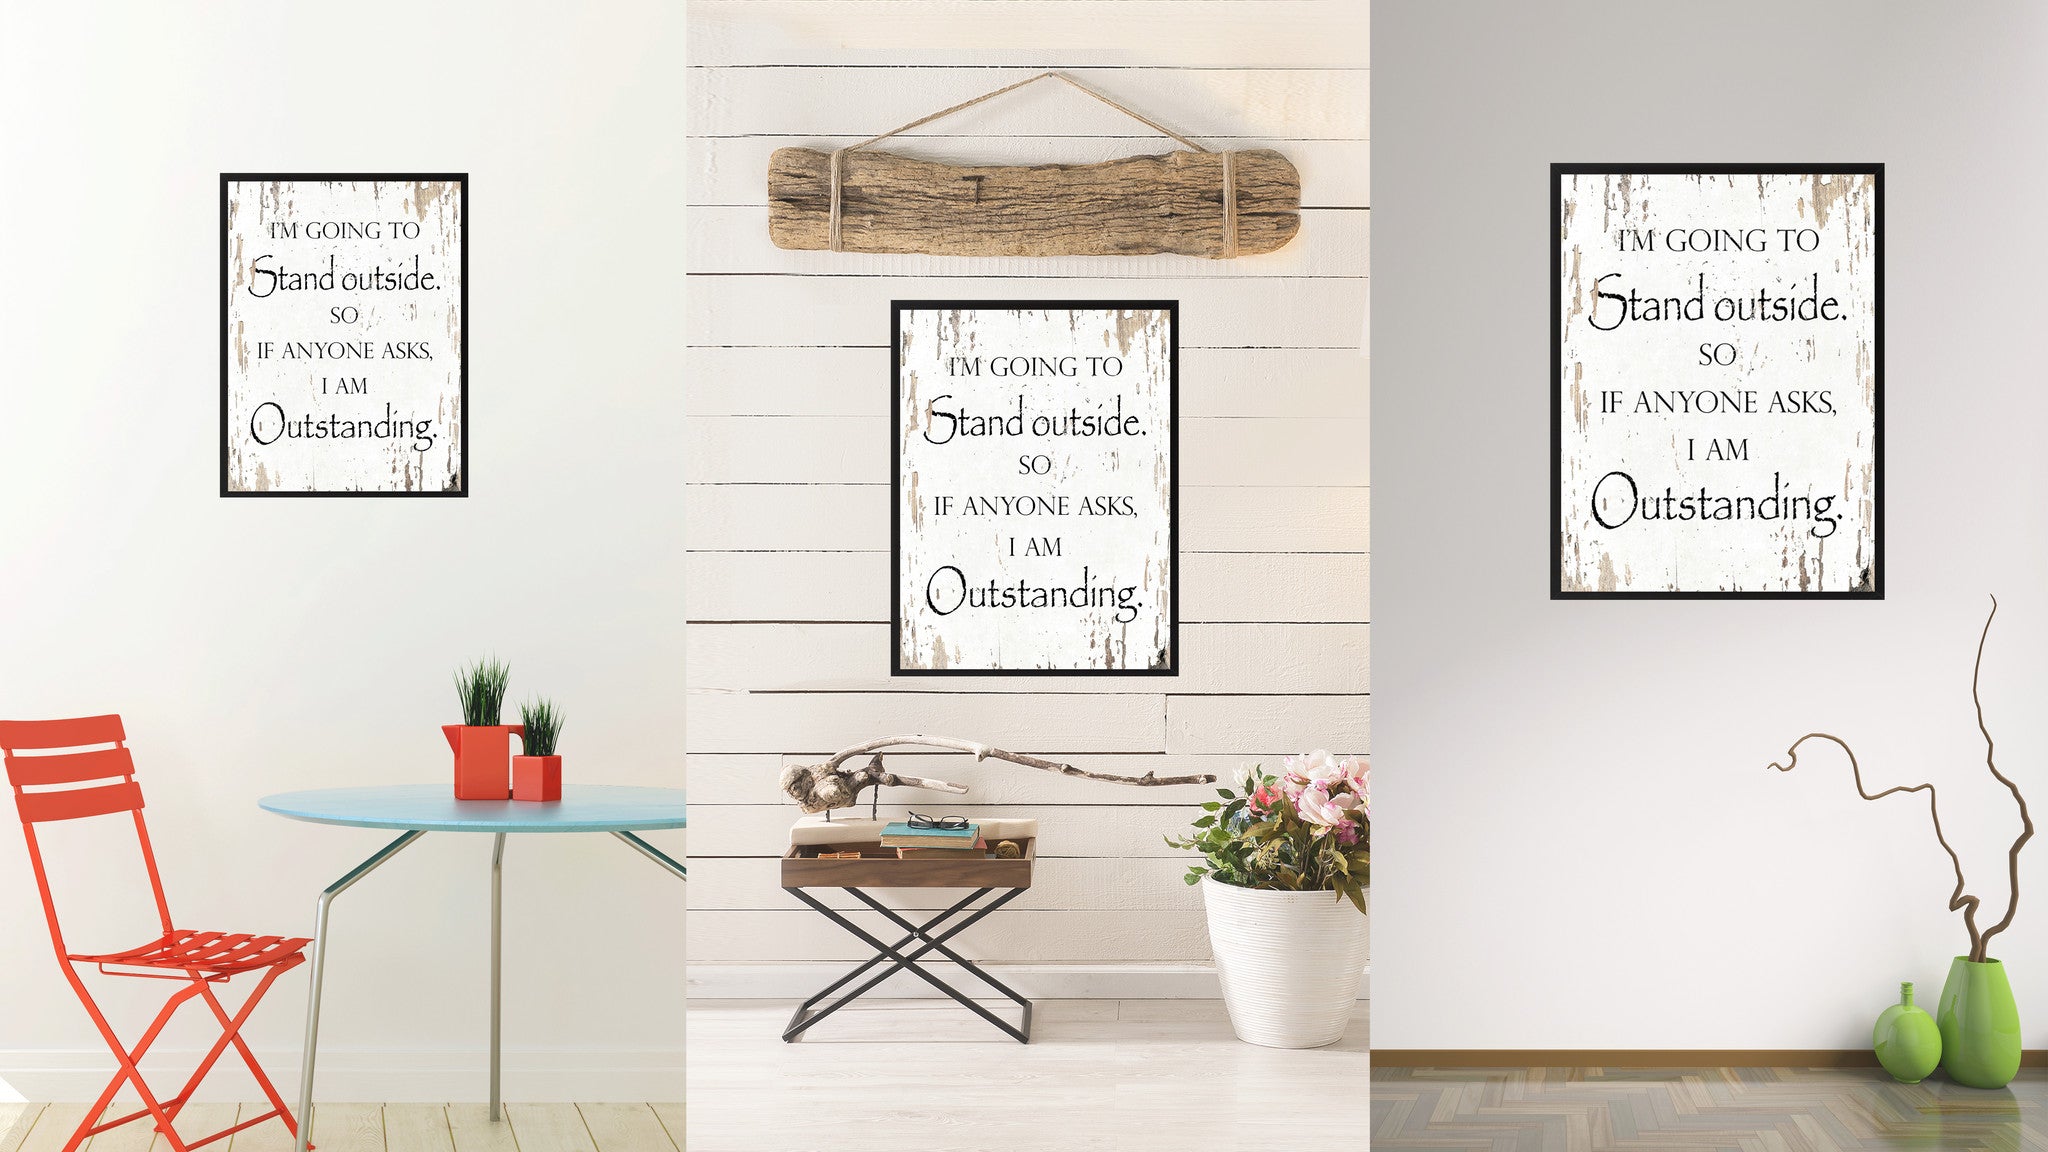 I'm going to stand outside so if anyone asks I am outstanding Funny Quote Saying Gift Ideas Home Decor Wall Art